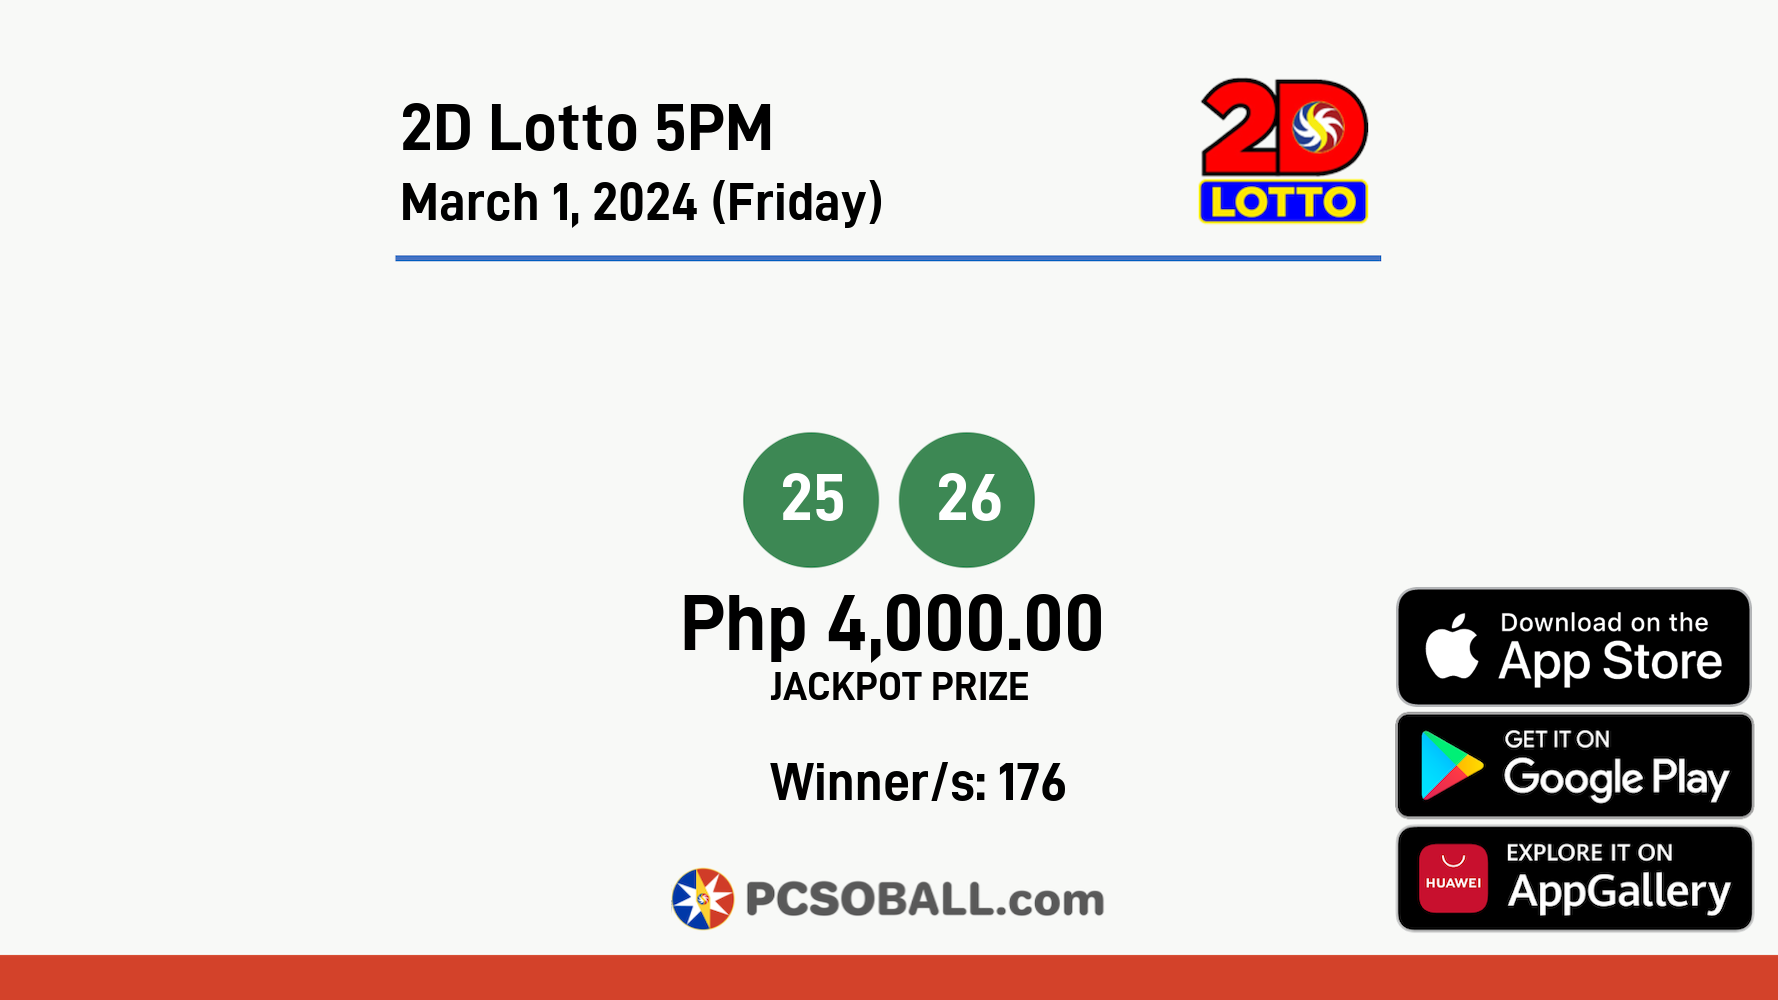 2D Lotto 5PM March 1, 2024 (Friday) Result